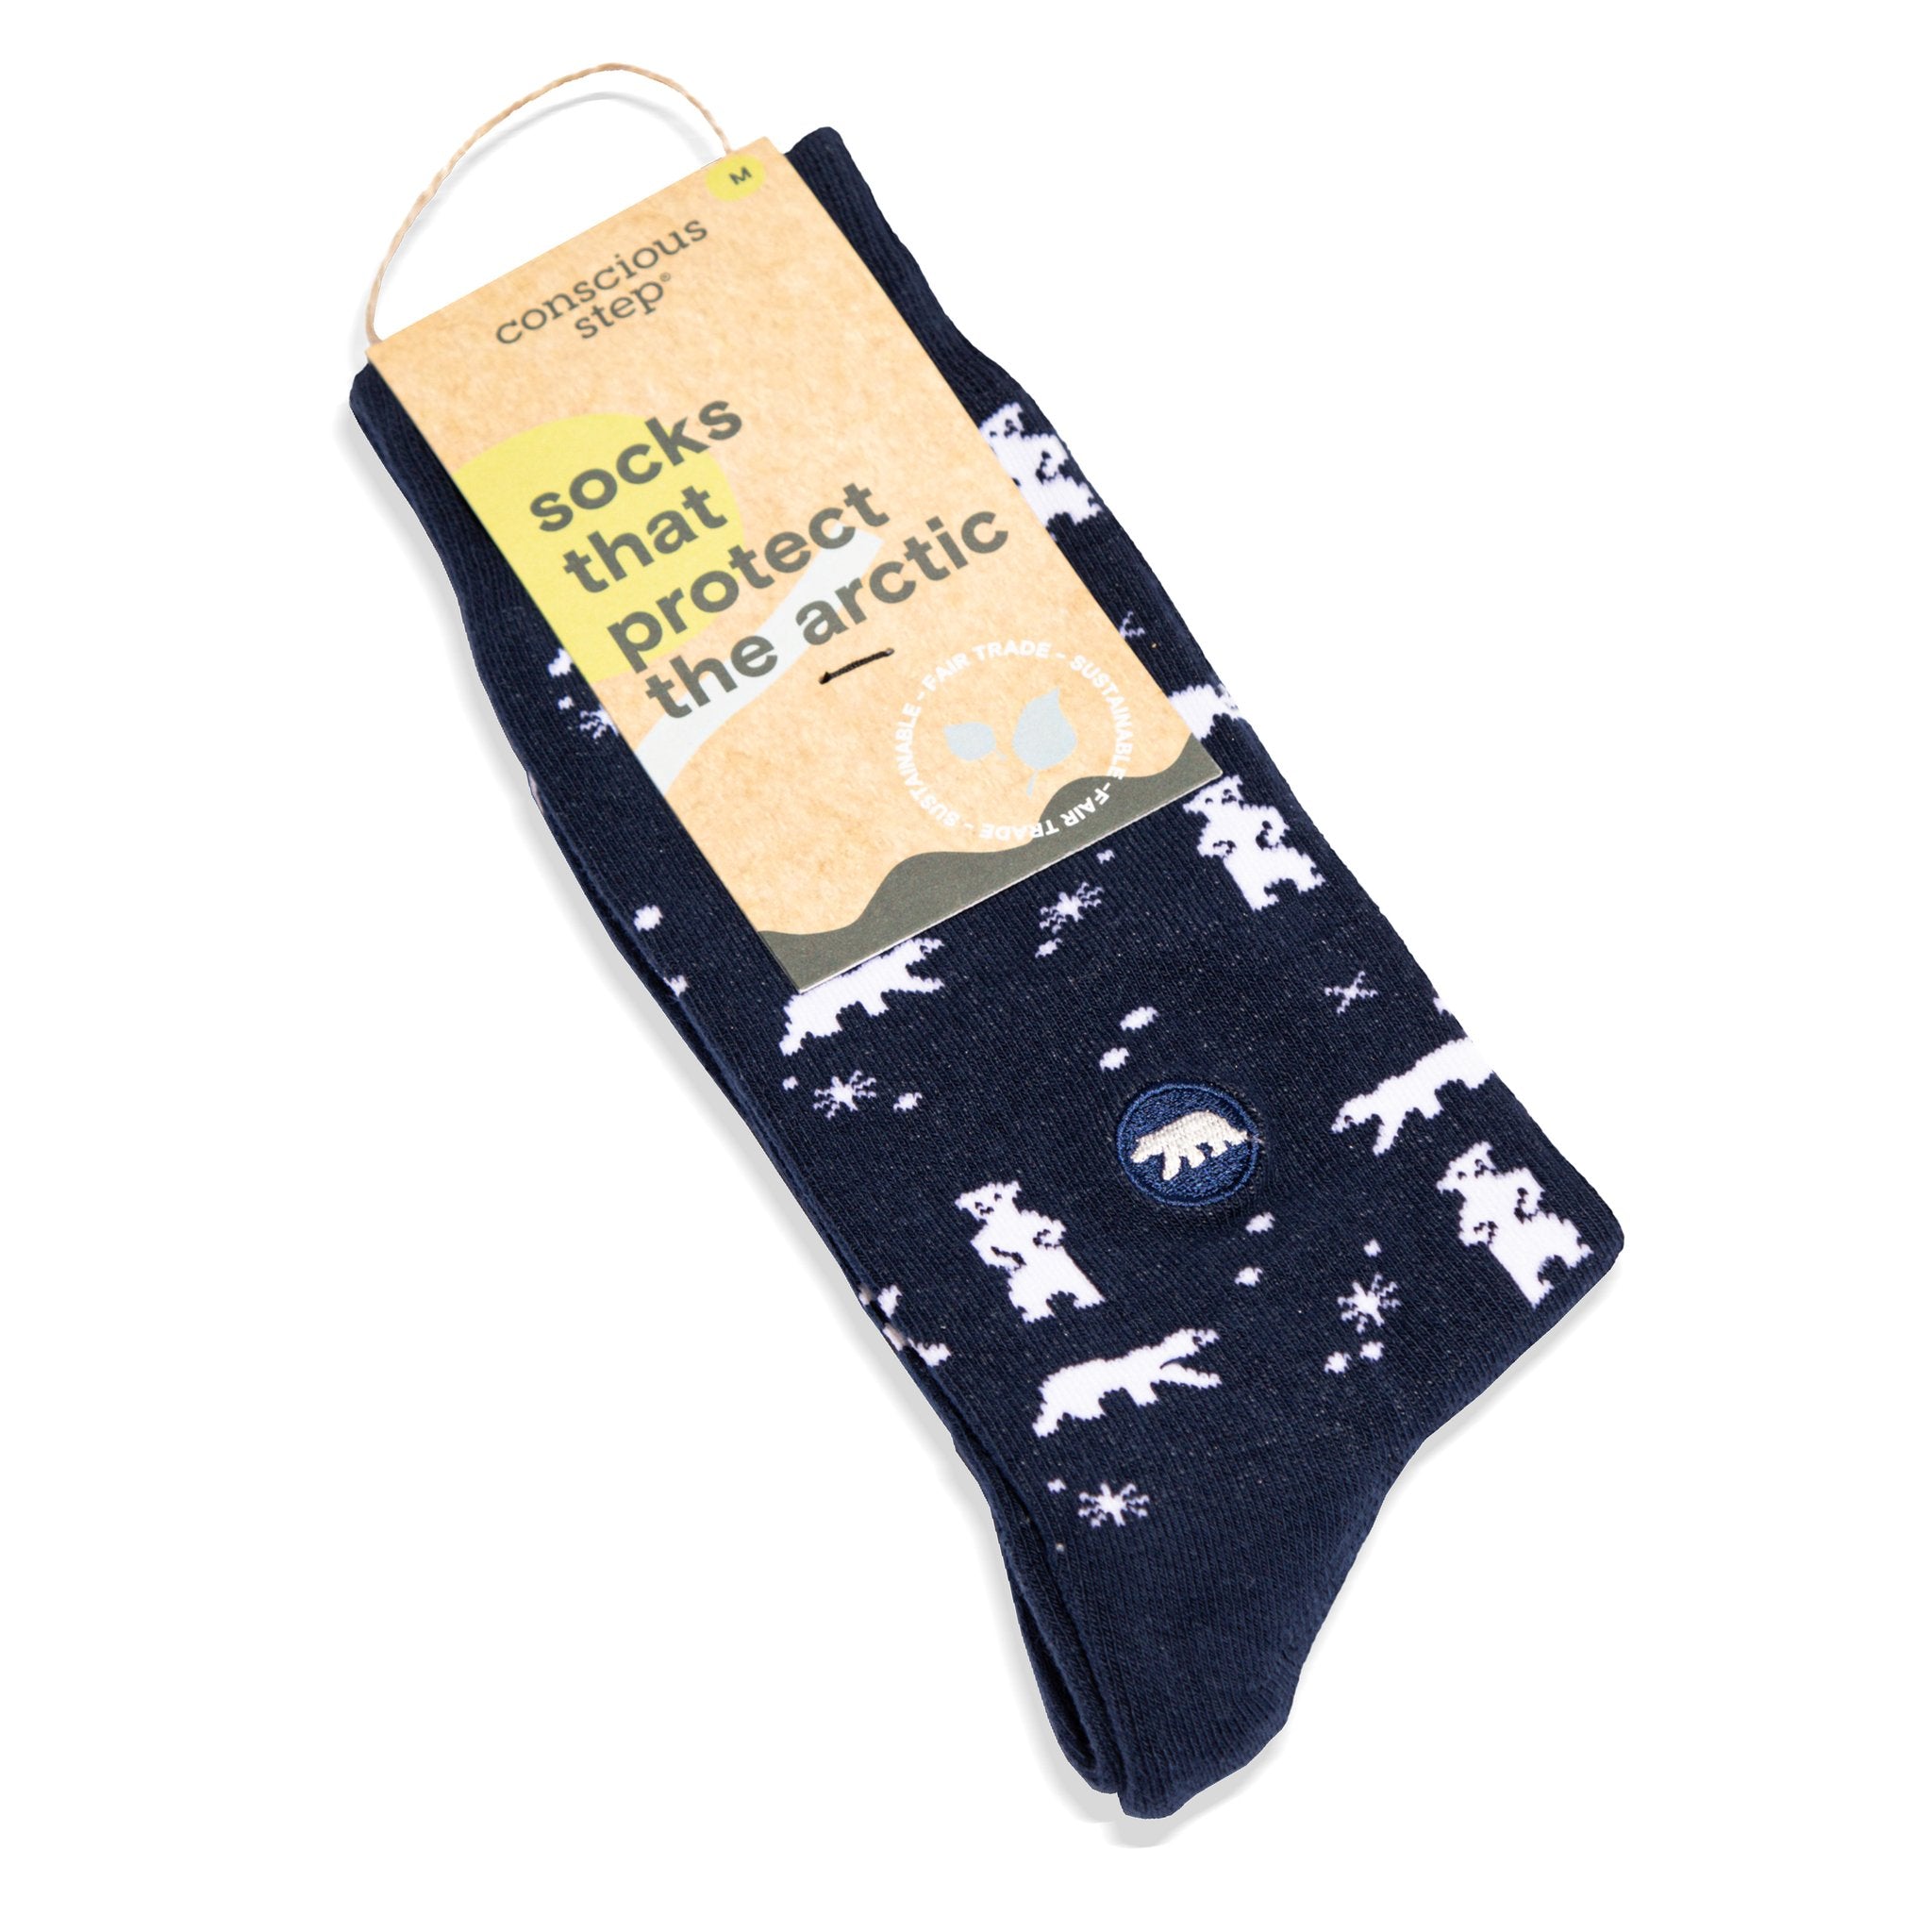 Socks That Protect the Arctic - Earth Ahead